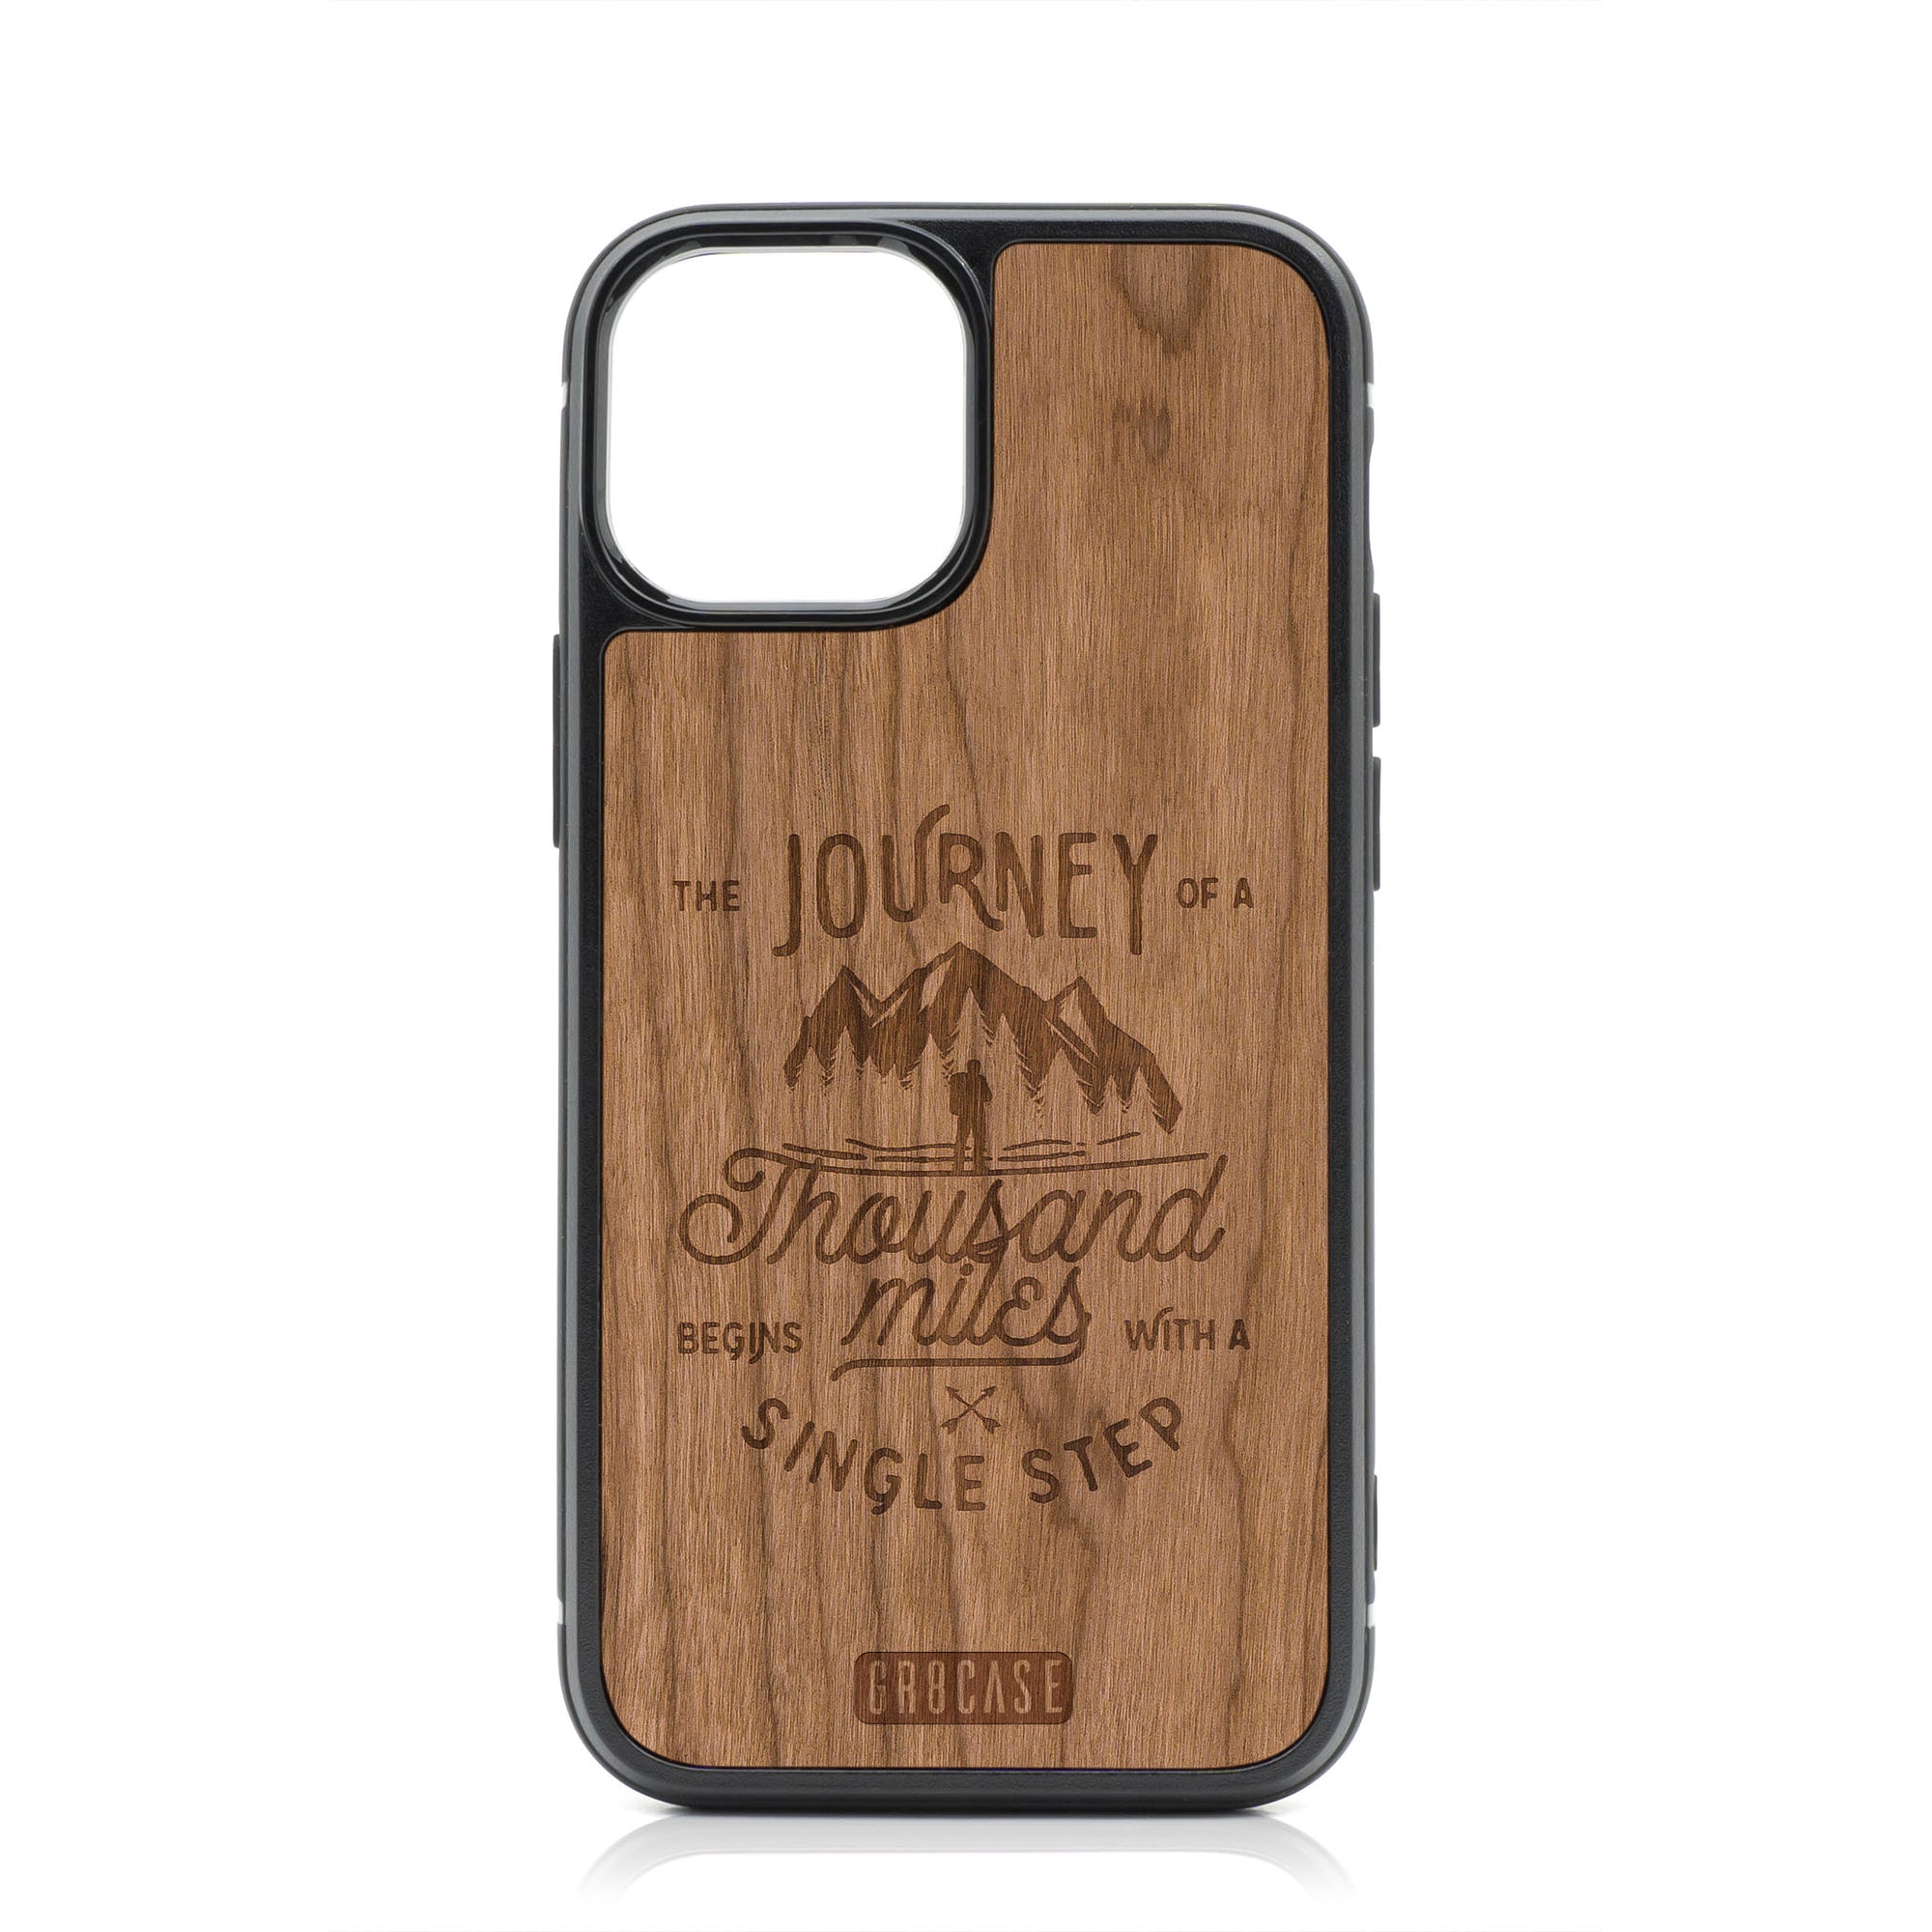 The Journey of A Thousand Miles Begins With A Single Step Design Wood Case For iPhone 13 Mini